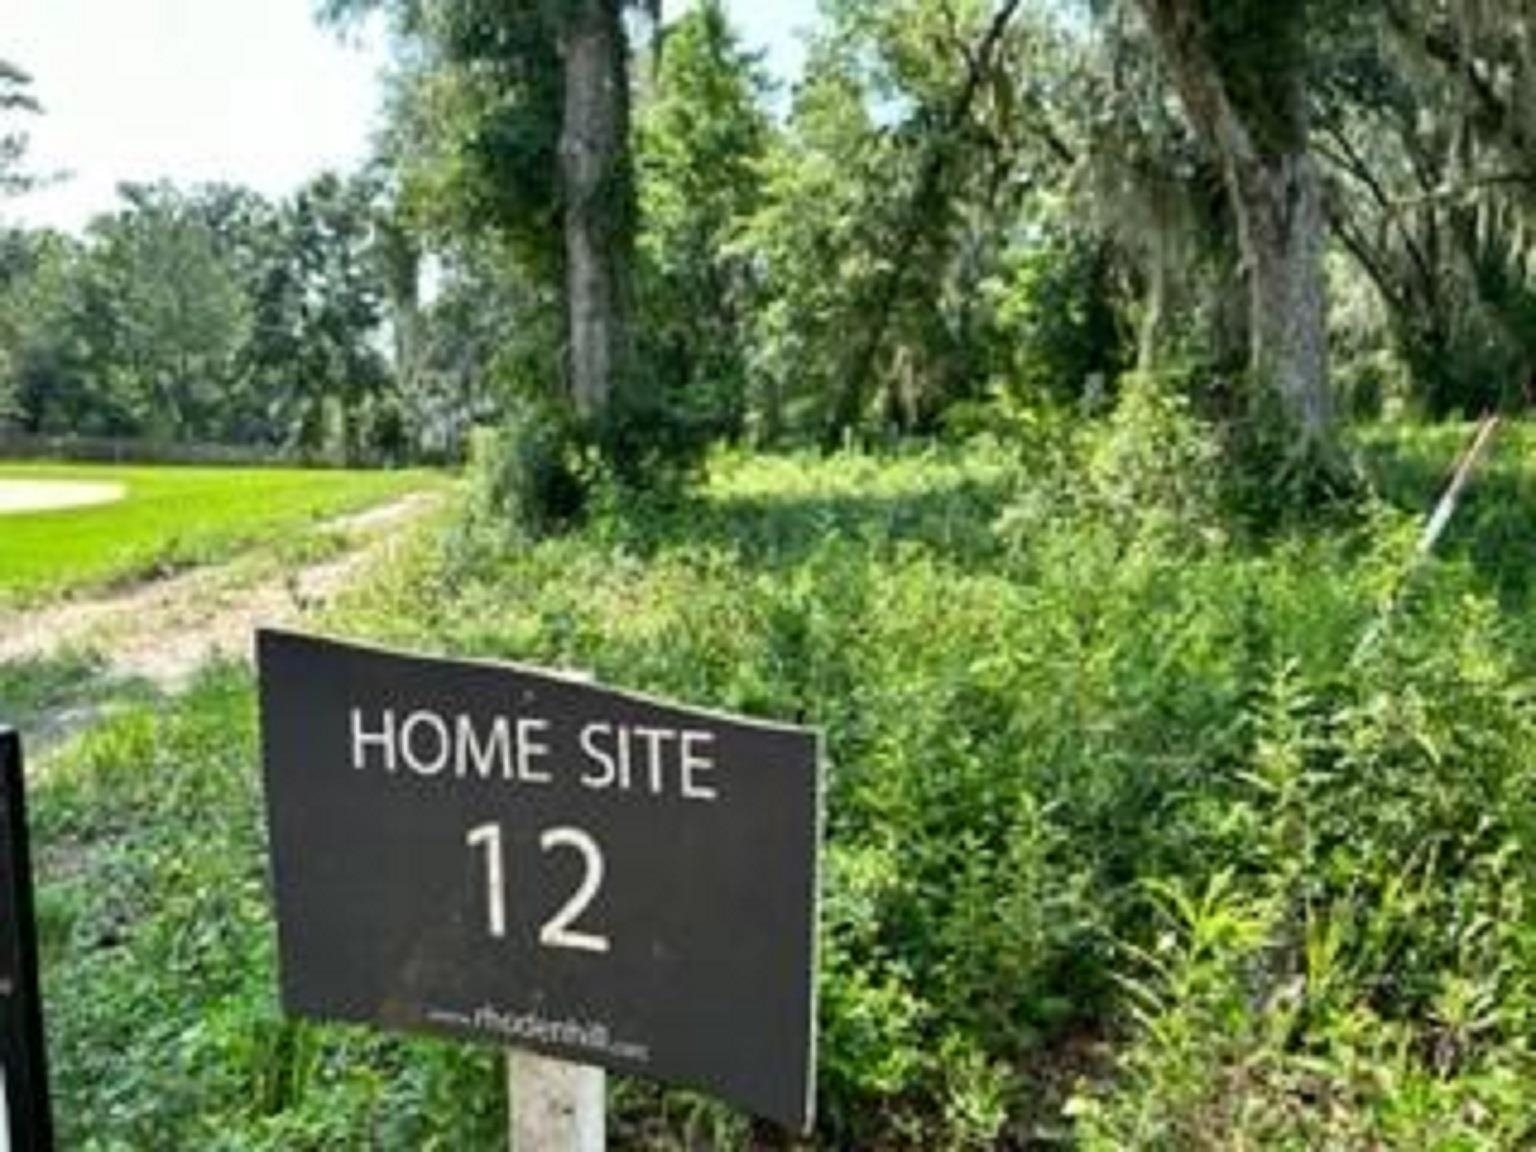 Lot 12 Rhoden Hill,TALLAHASSEE,Florida 32312,Lots and land,Rhoden Hill,361300